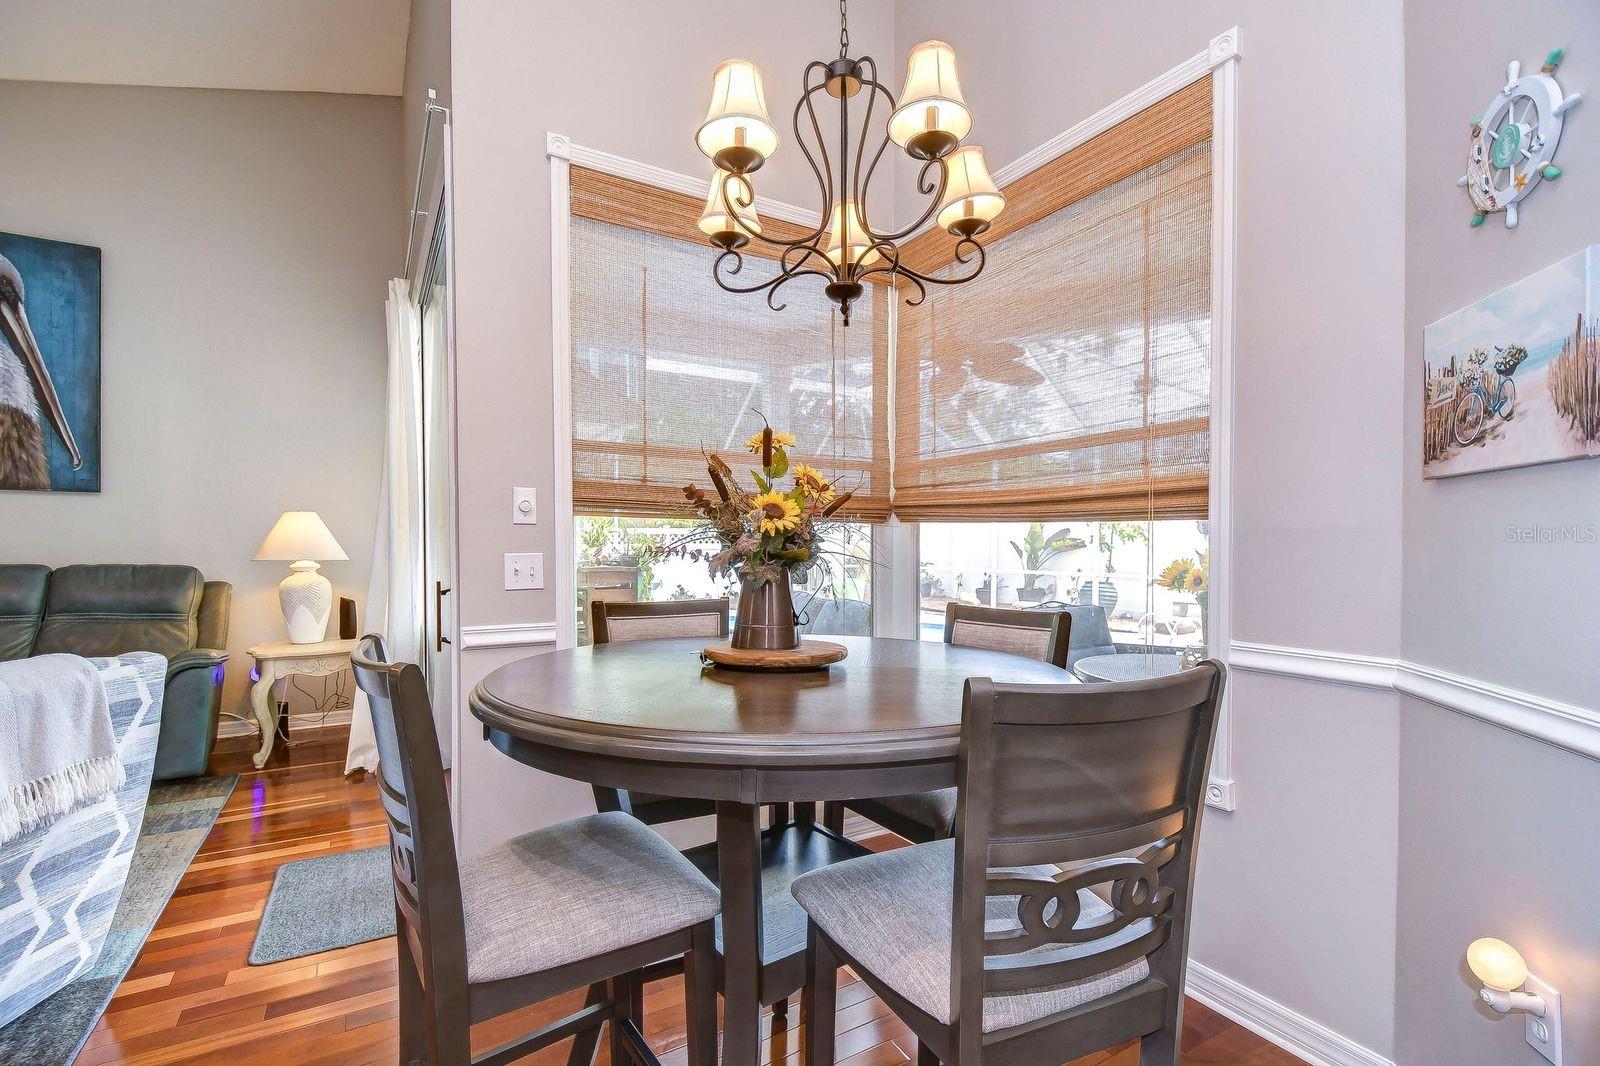 The breakfast nook completes the beautiful kitchen.